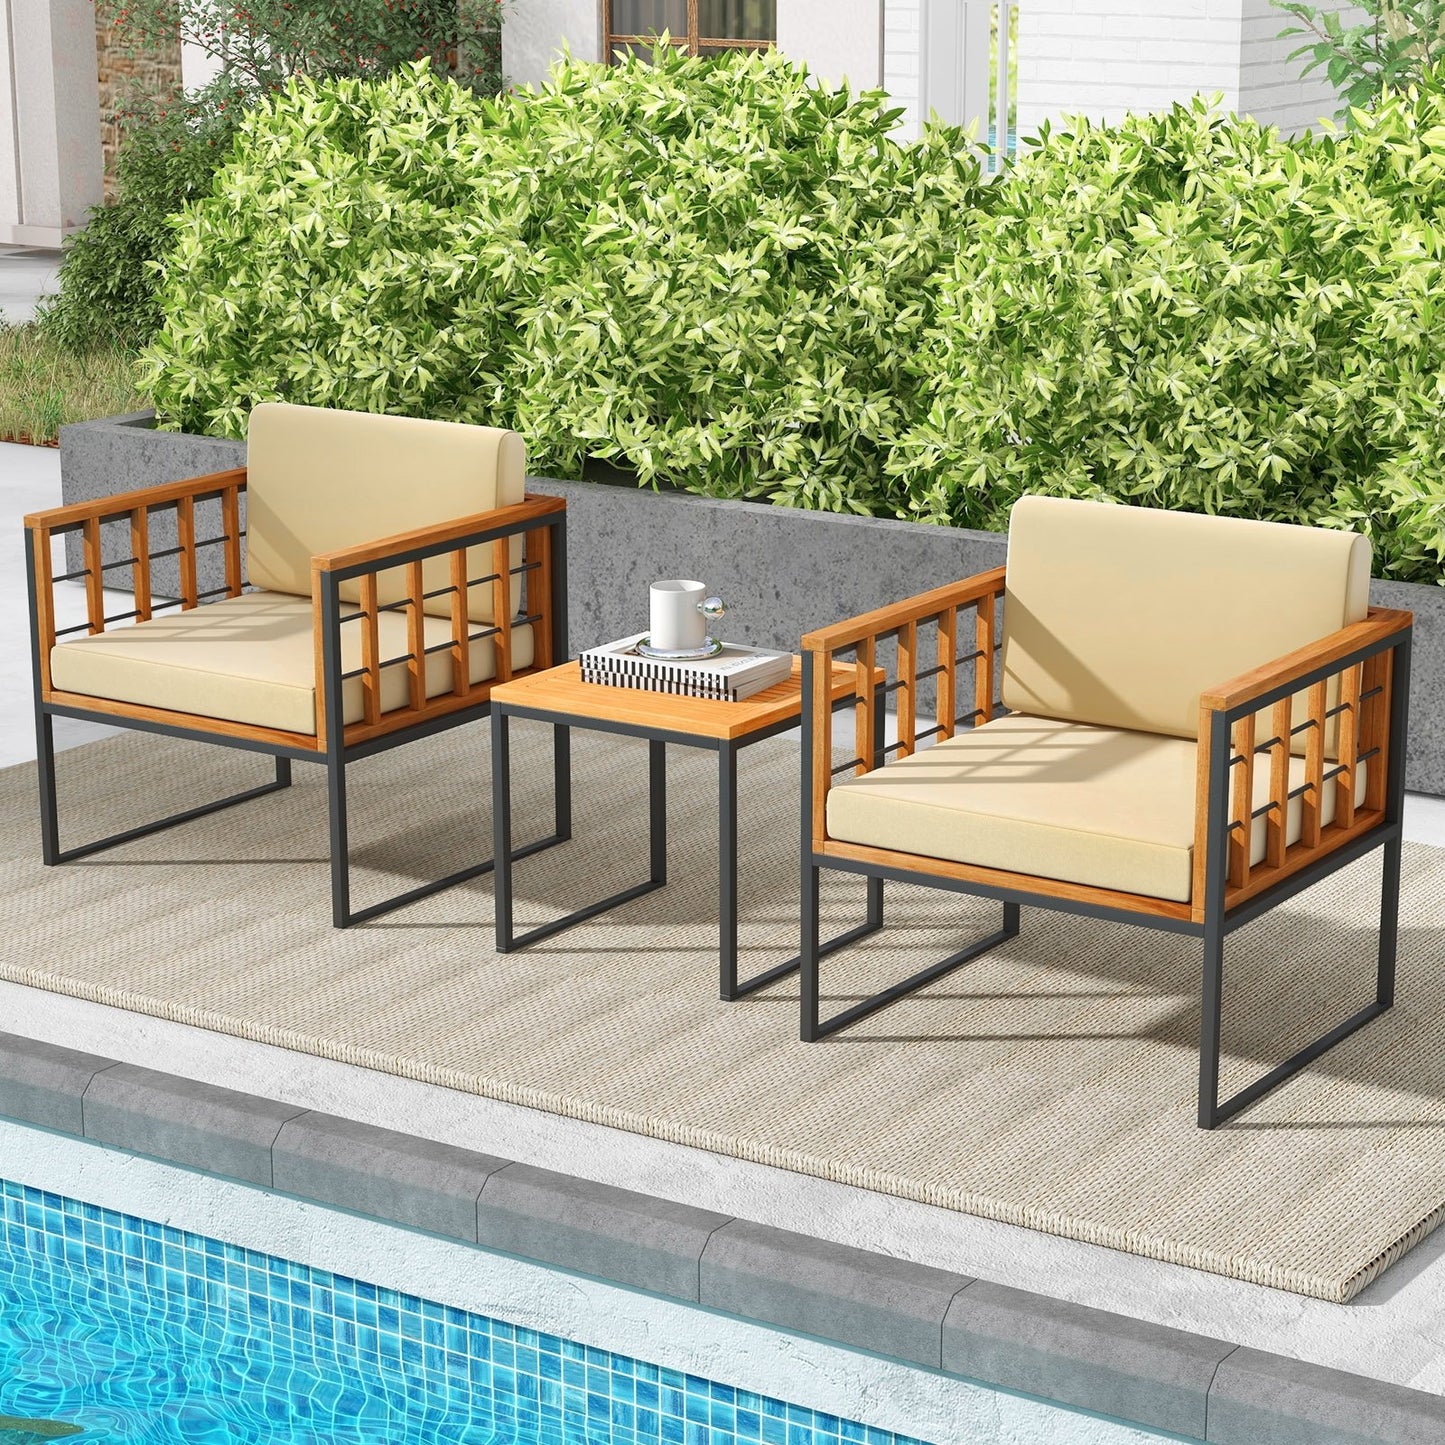 3 Pieces Patio Chair Set Acacia Wood Outdoor Sofa Set with Soft Cushions, Beige